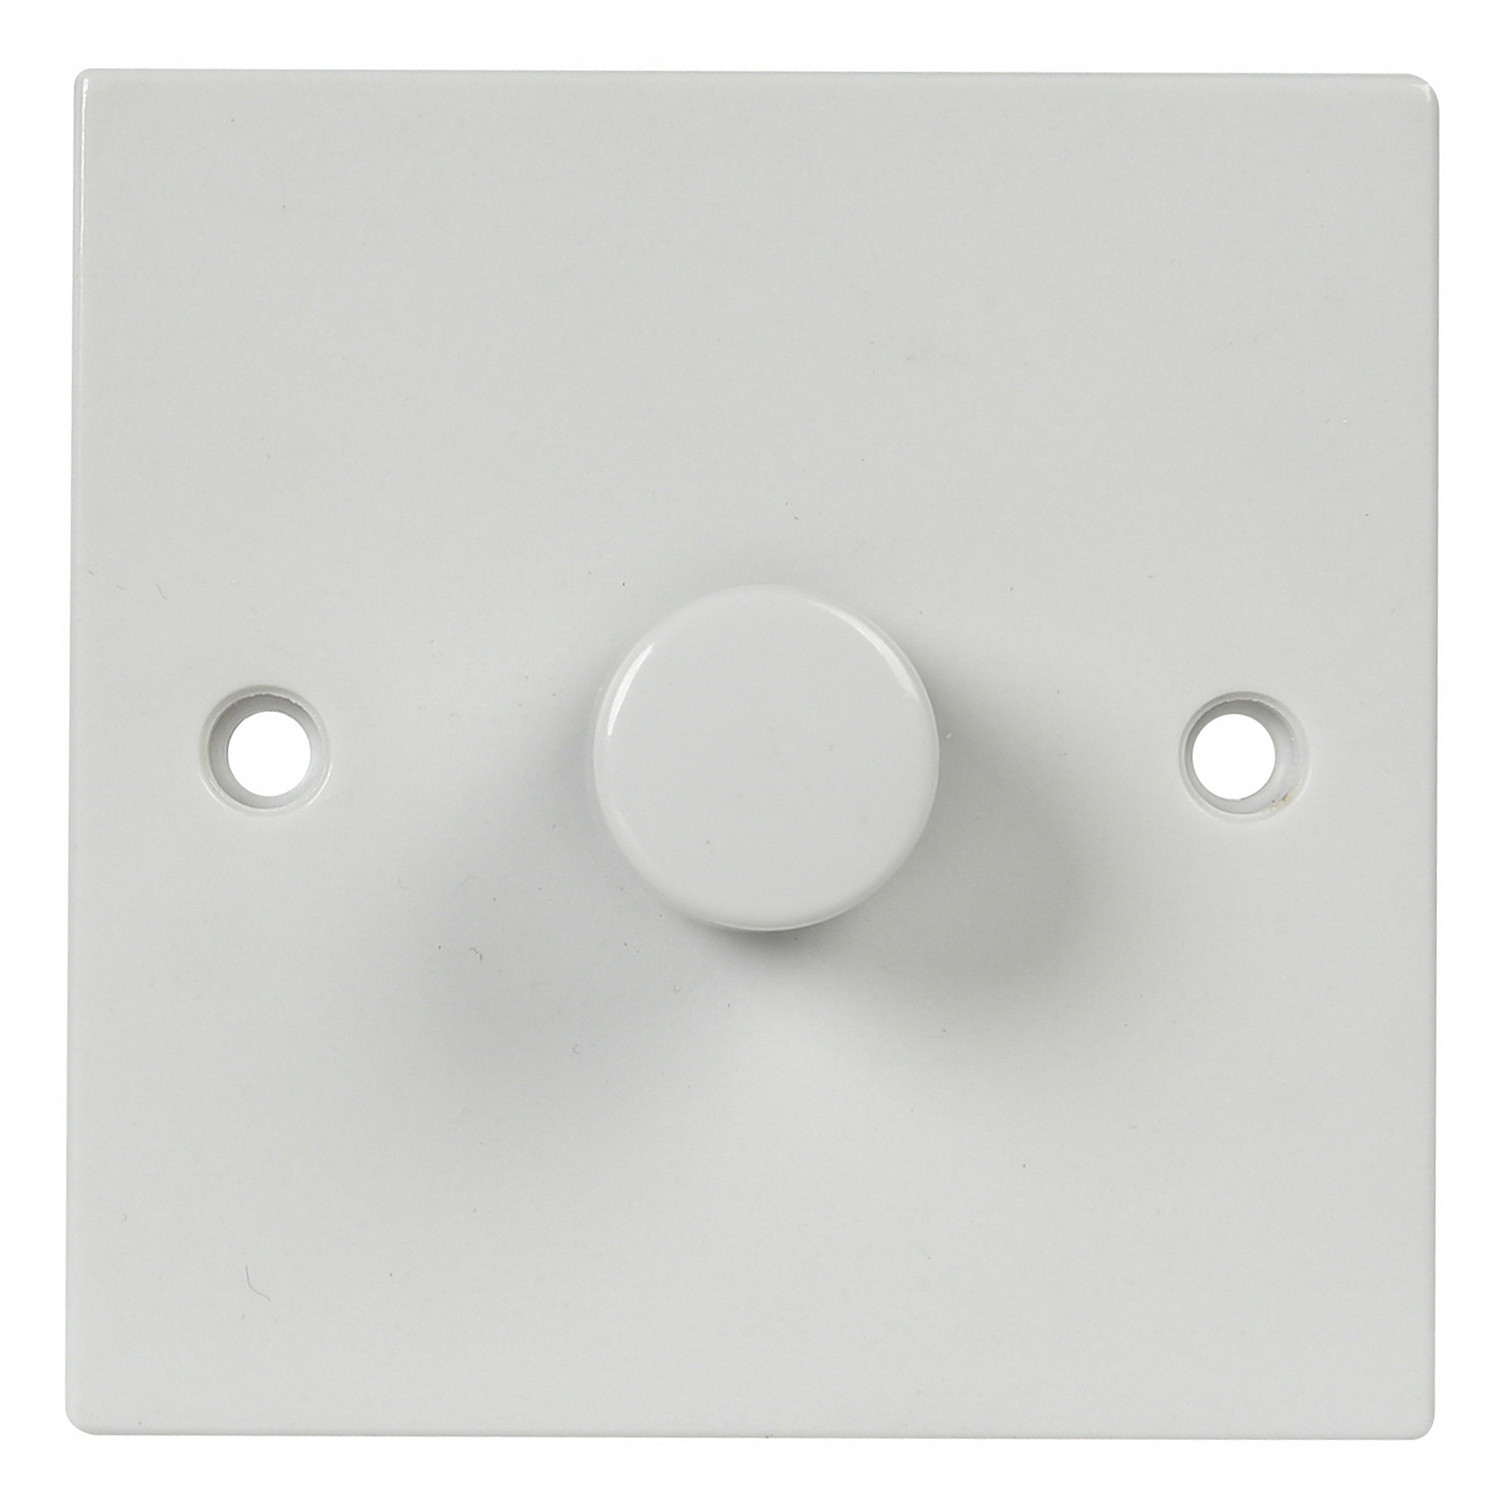 1GANG DIMMER SWITCH